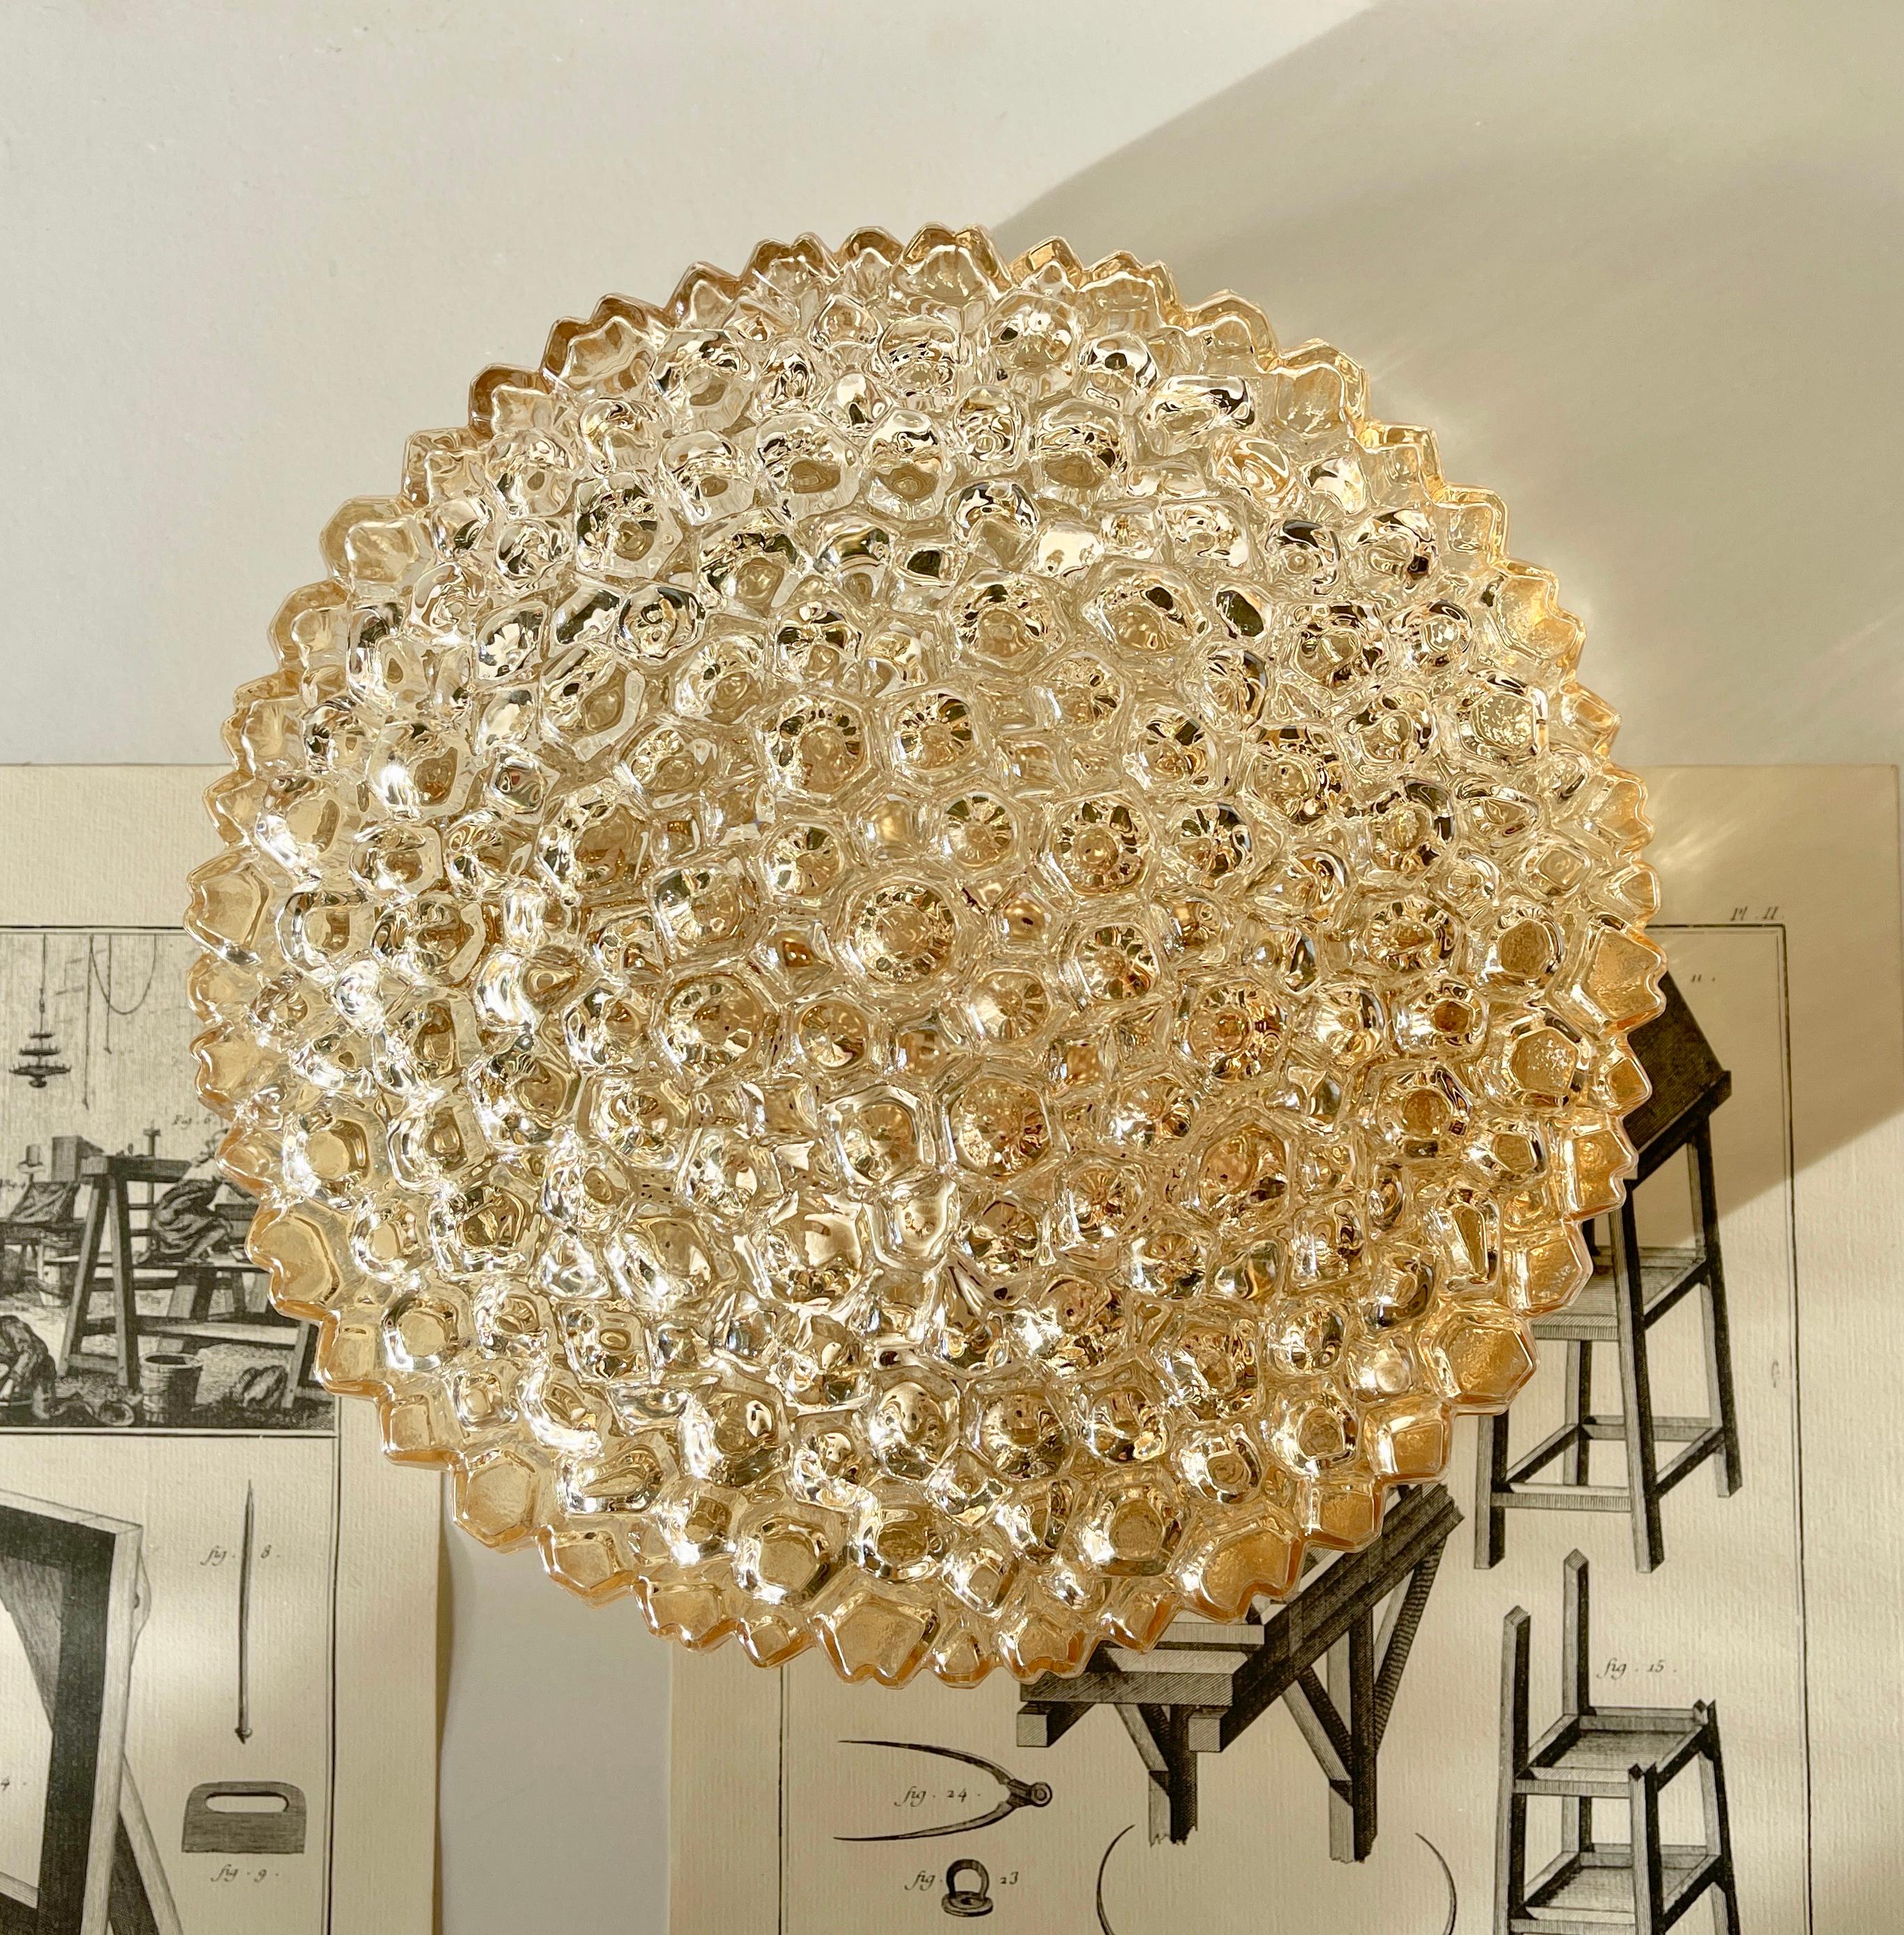 Magnificent, flush base ceiling or wall lamp by 'Glashütte Limburg', Germans famous mid century manufacturer of high-end design lighting.
Helena Tynell is one of the artists who created the most beautiful lighting of that time.
Comes in a round